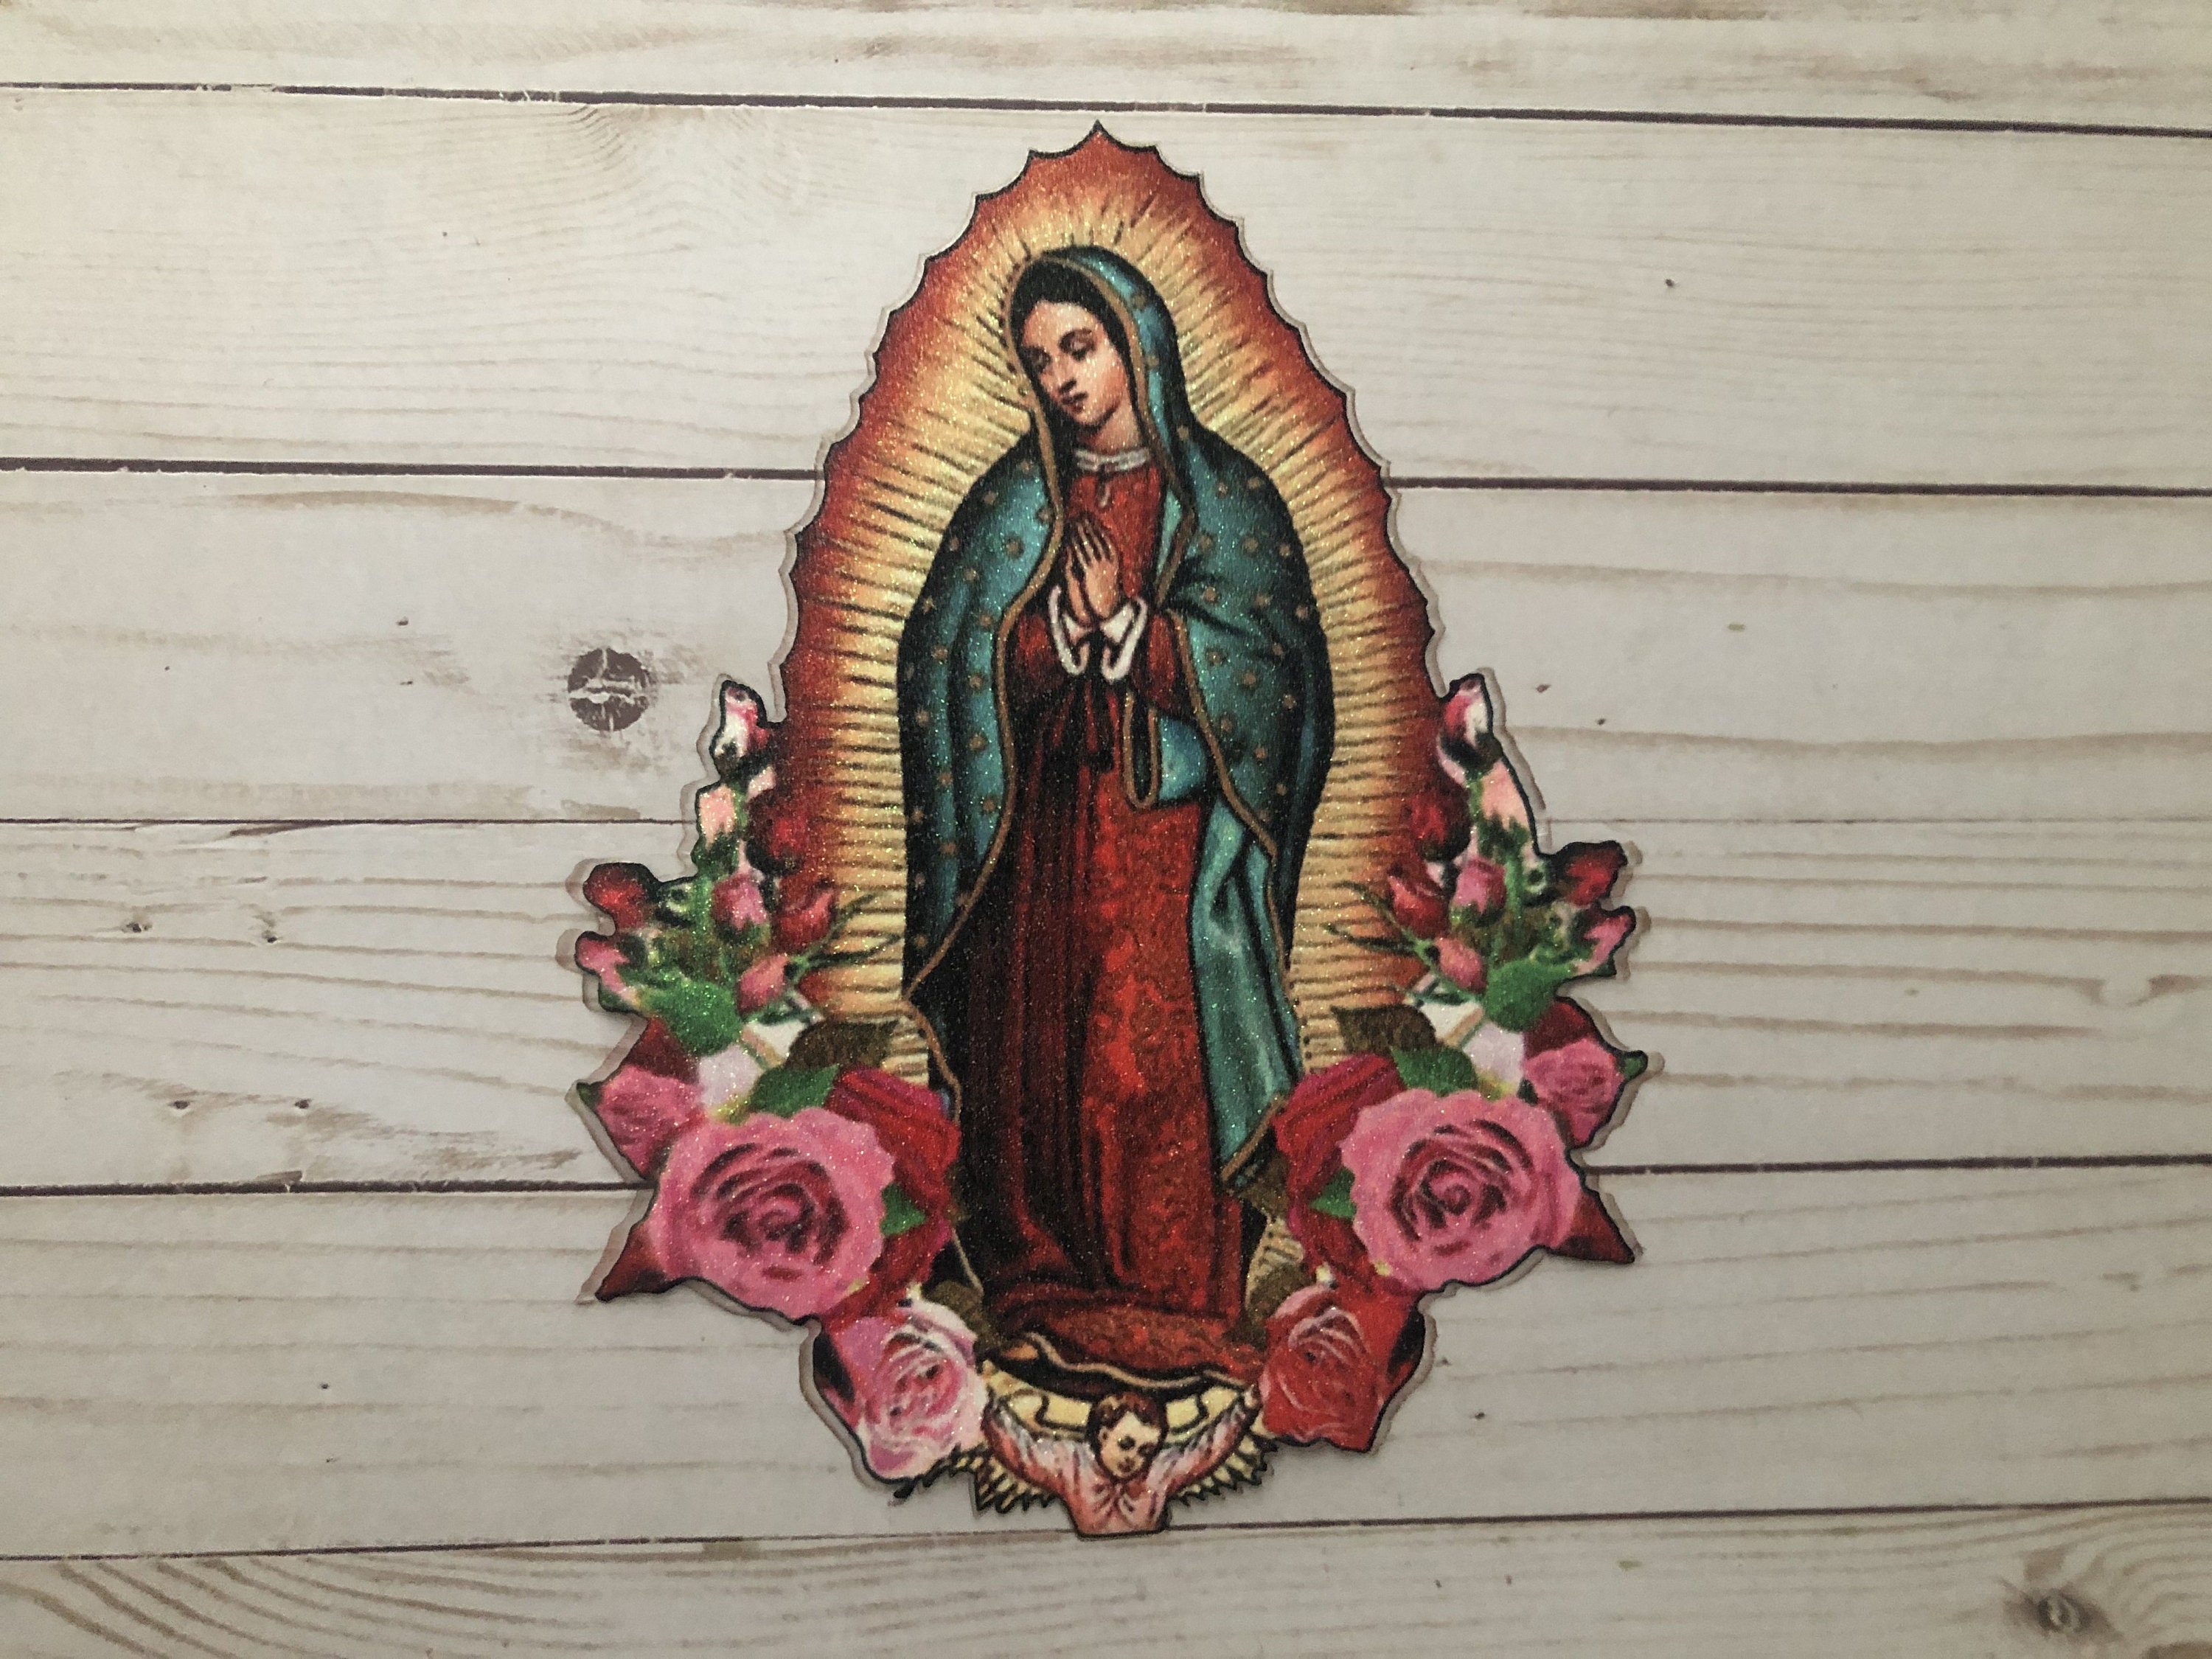 Riley Blake Designs Eleanor Guadalupe Virgin Mary C11712-BLACK Cotton Fabric  BTY